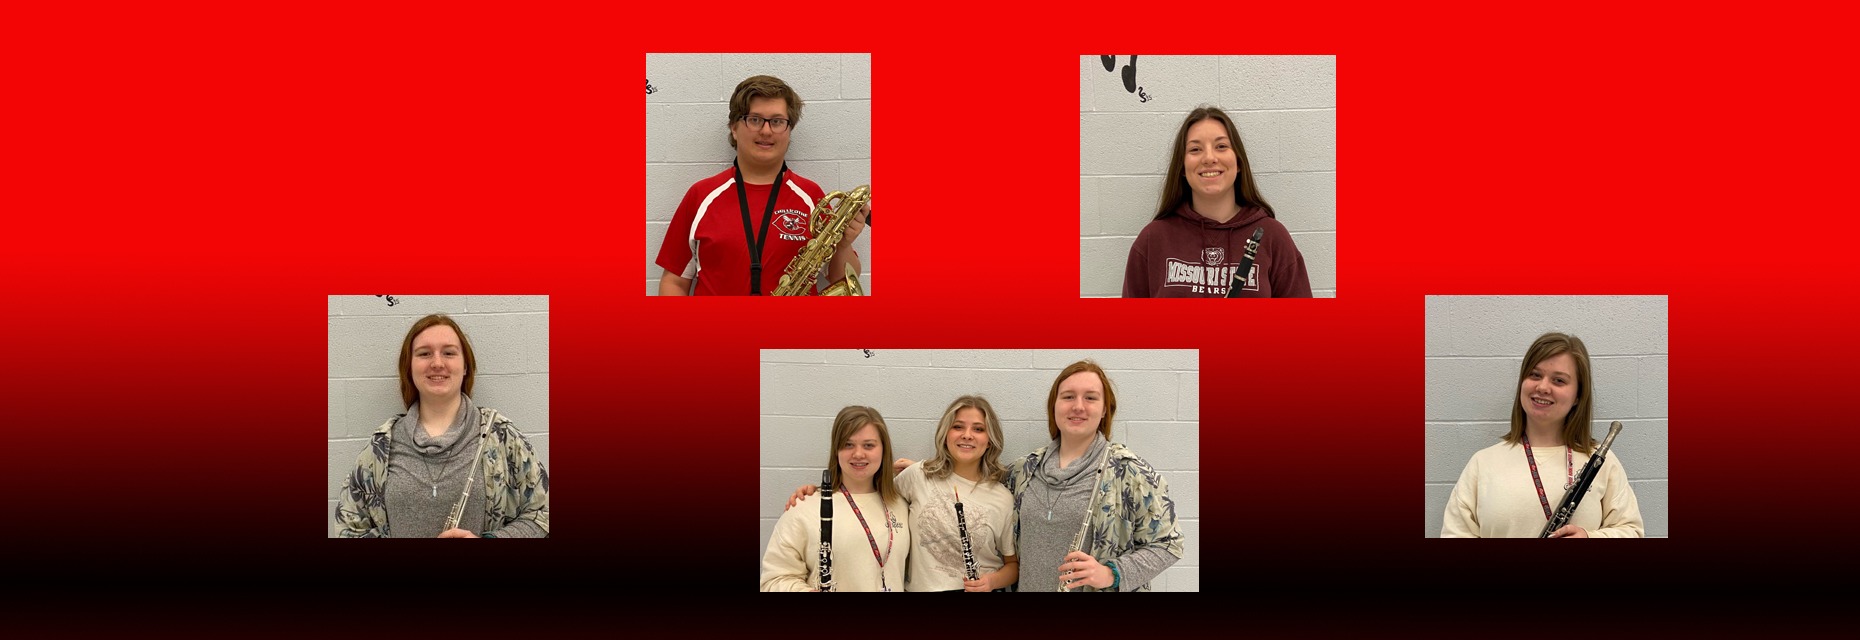 CHS Band Members Ranked At MSHSAA State music Festival KCHI Radio